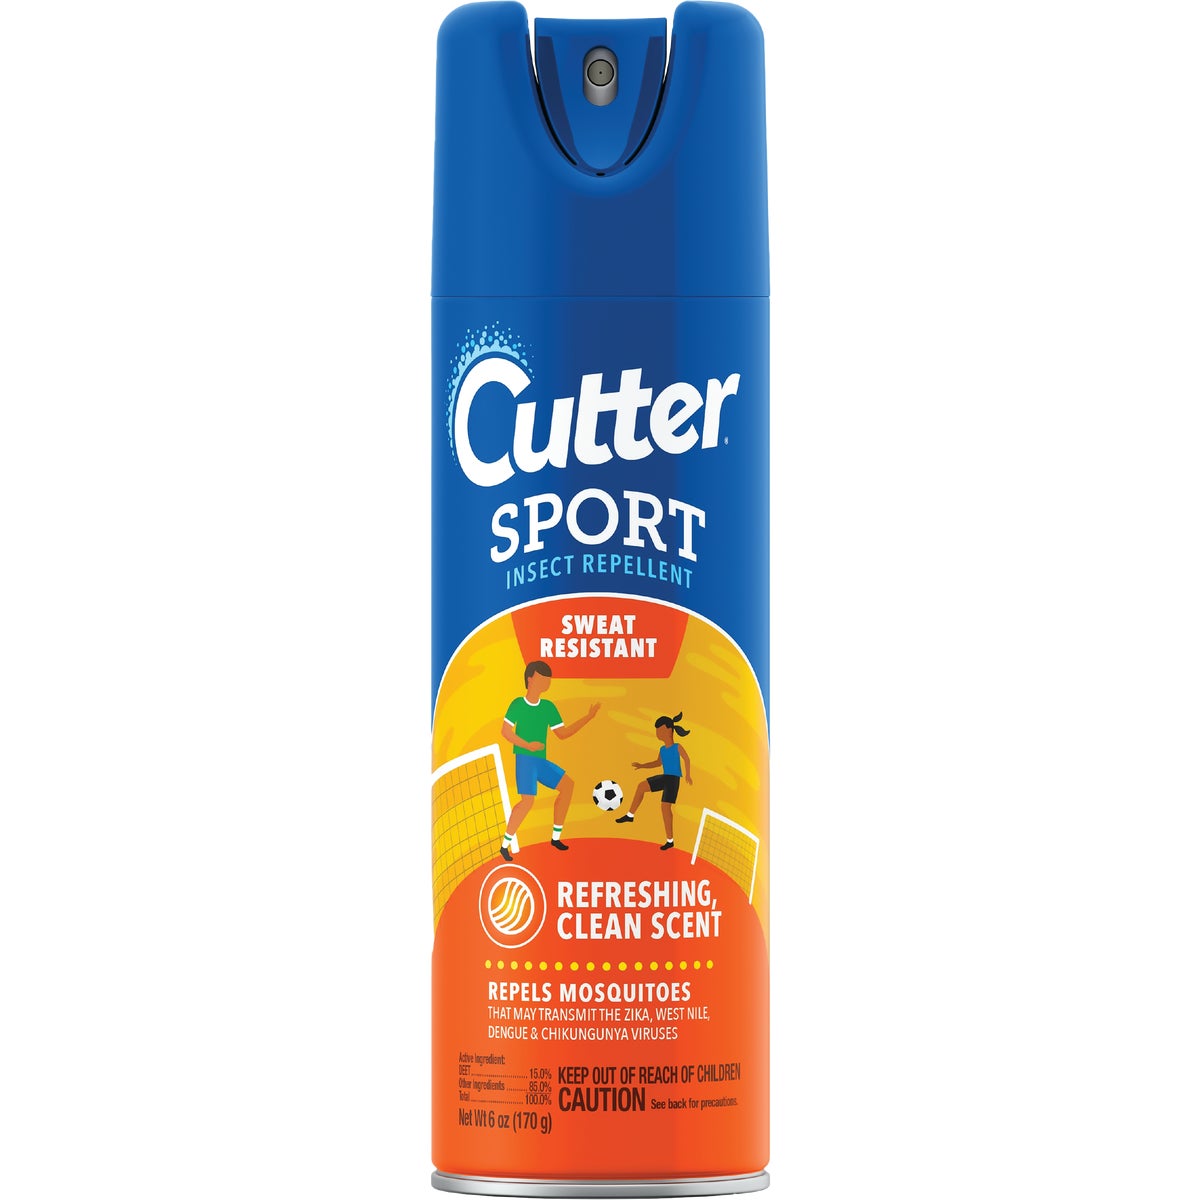 Item 700951, Cutter Sport insect repellent contains 15% DEET.